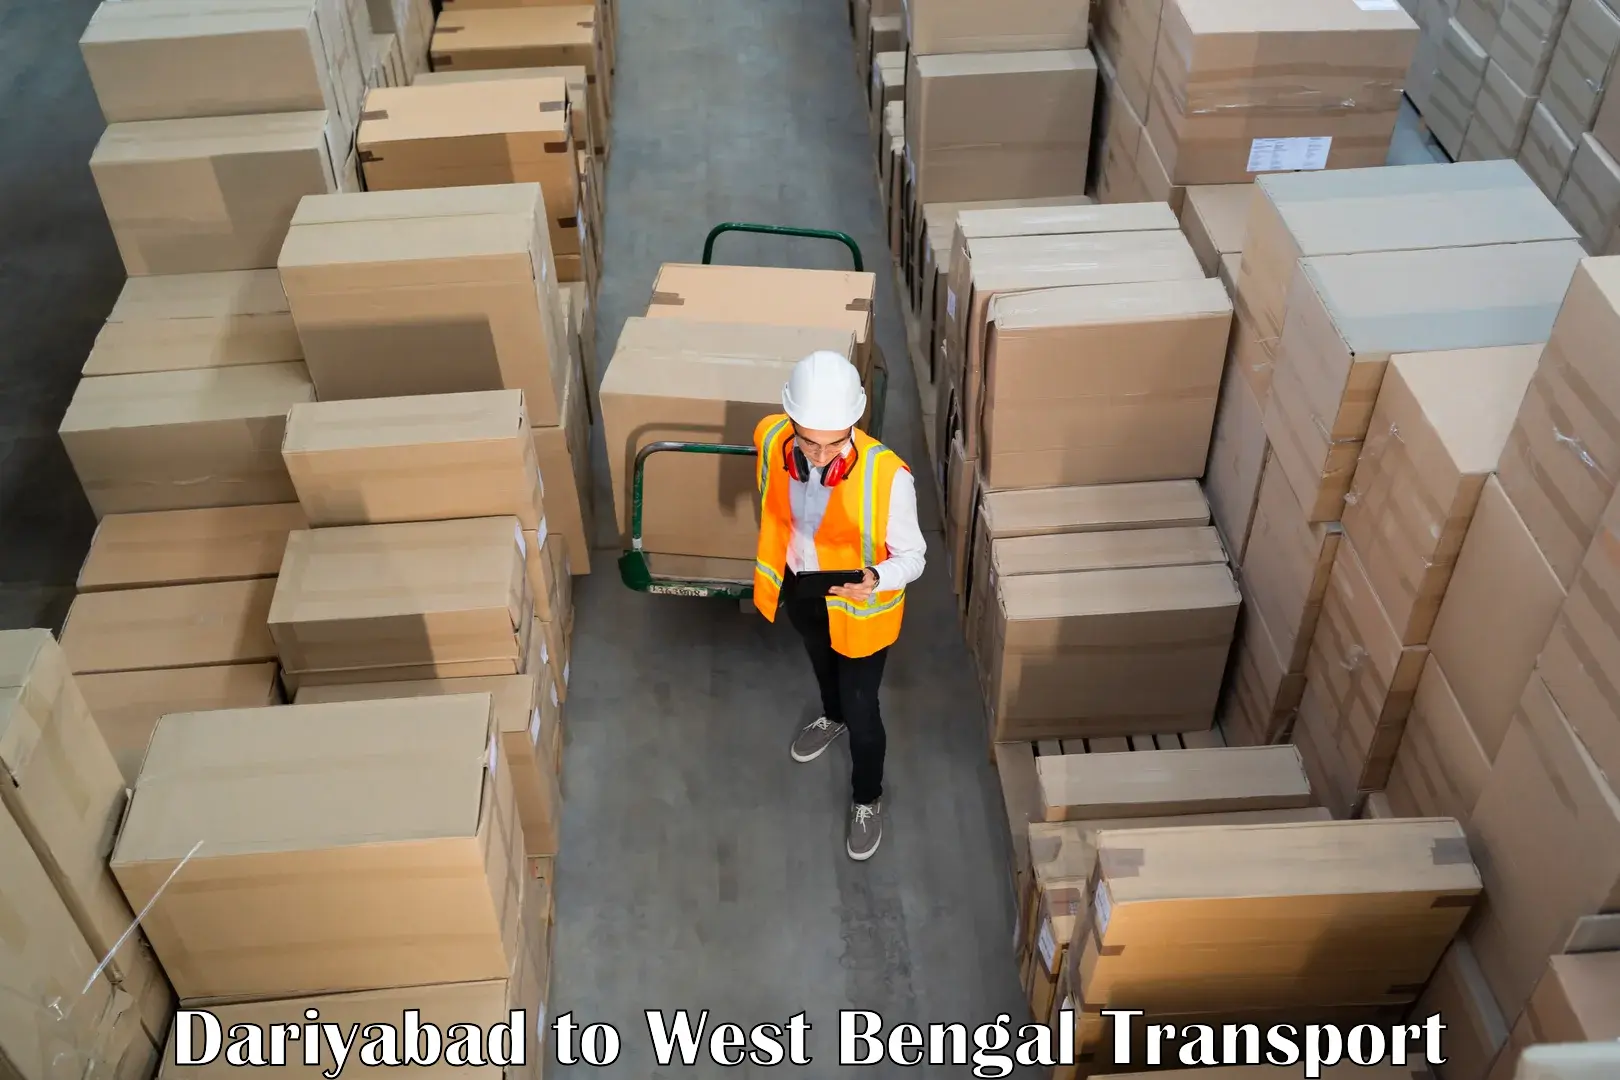 Air freight transport services Dariyabad to West Bengal